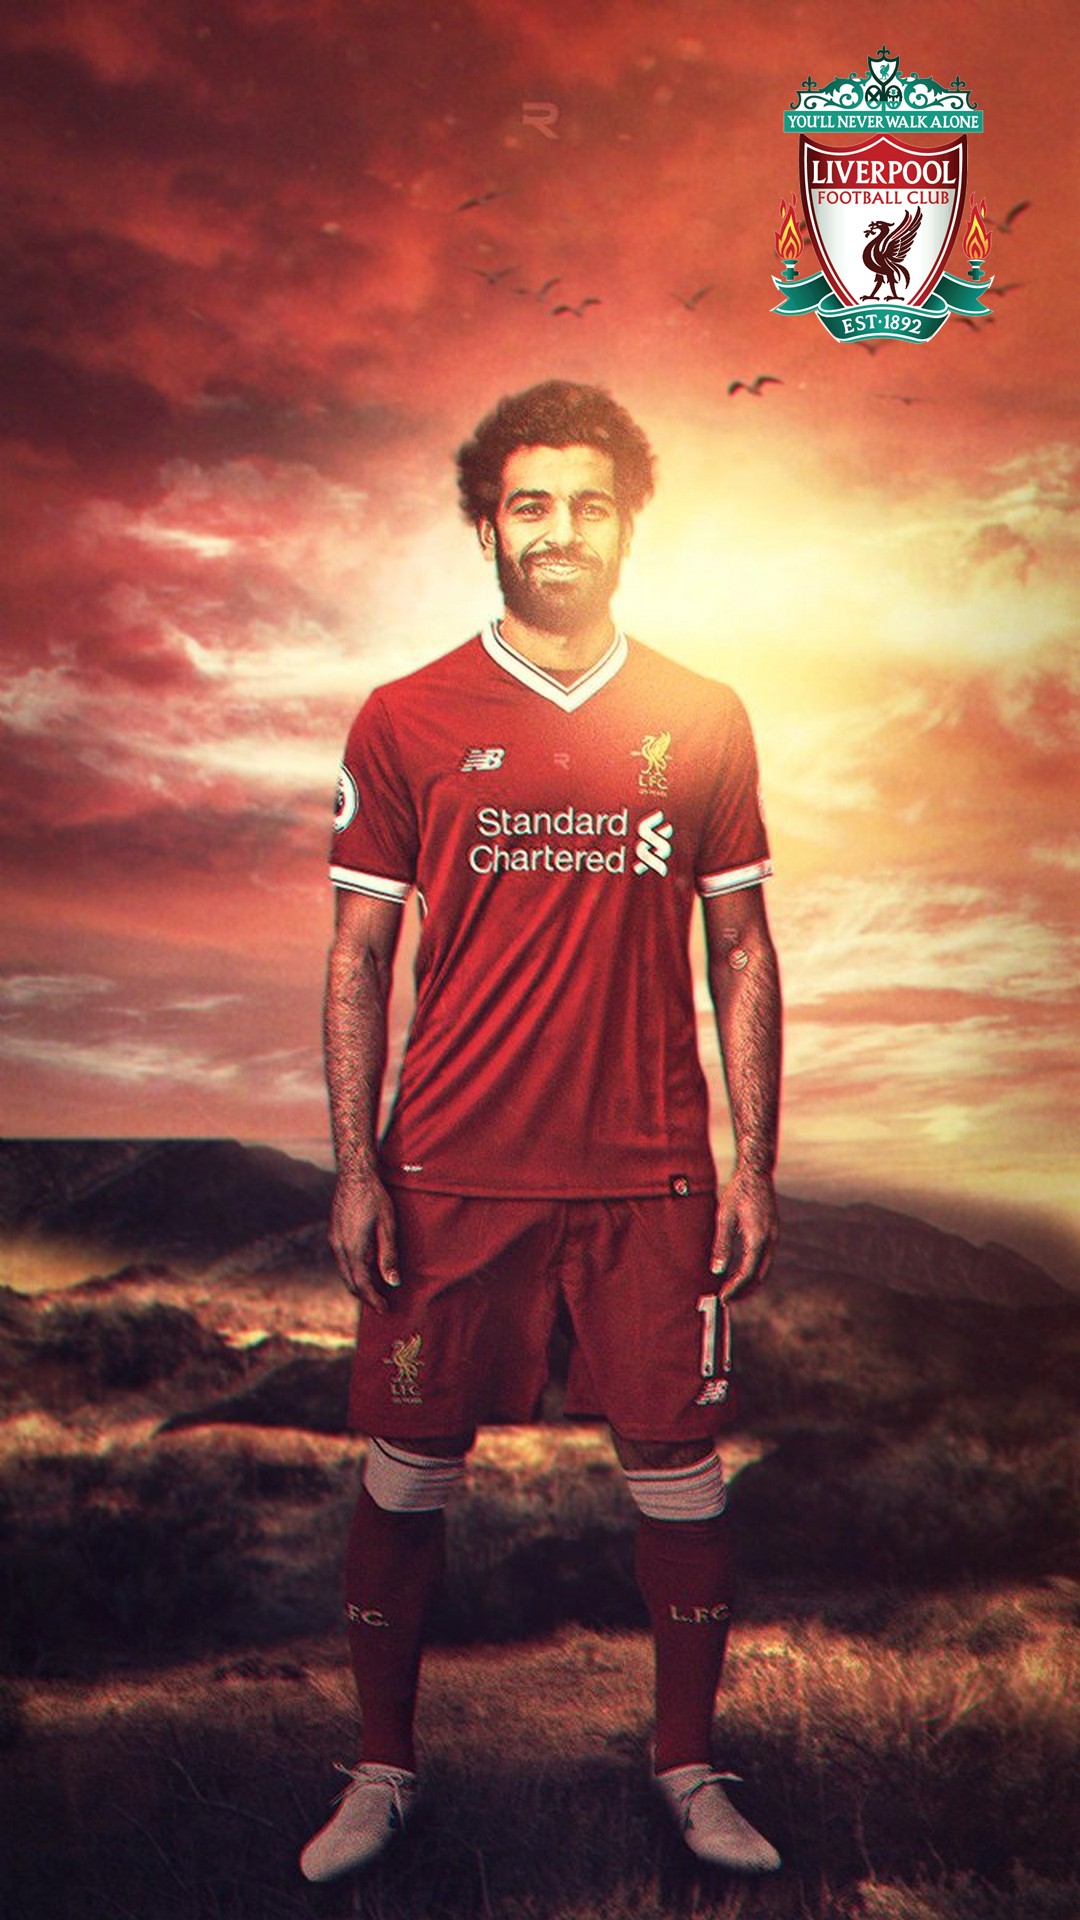 Salah Liverpool Wallpaper iPhone with resolution 1080X1920 pixel. You can make this wallpaper for your iPhone 5, 6, 7, 8, X backgrounds, Mobile Screensaver, or iPad Lock Screen